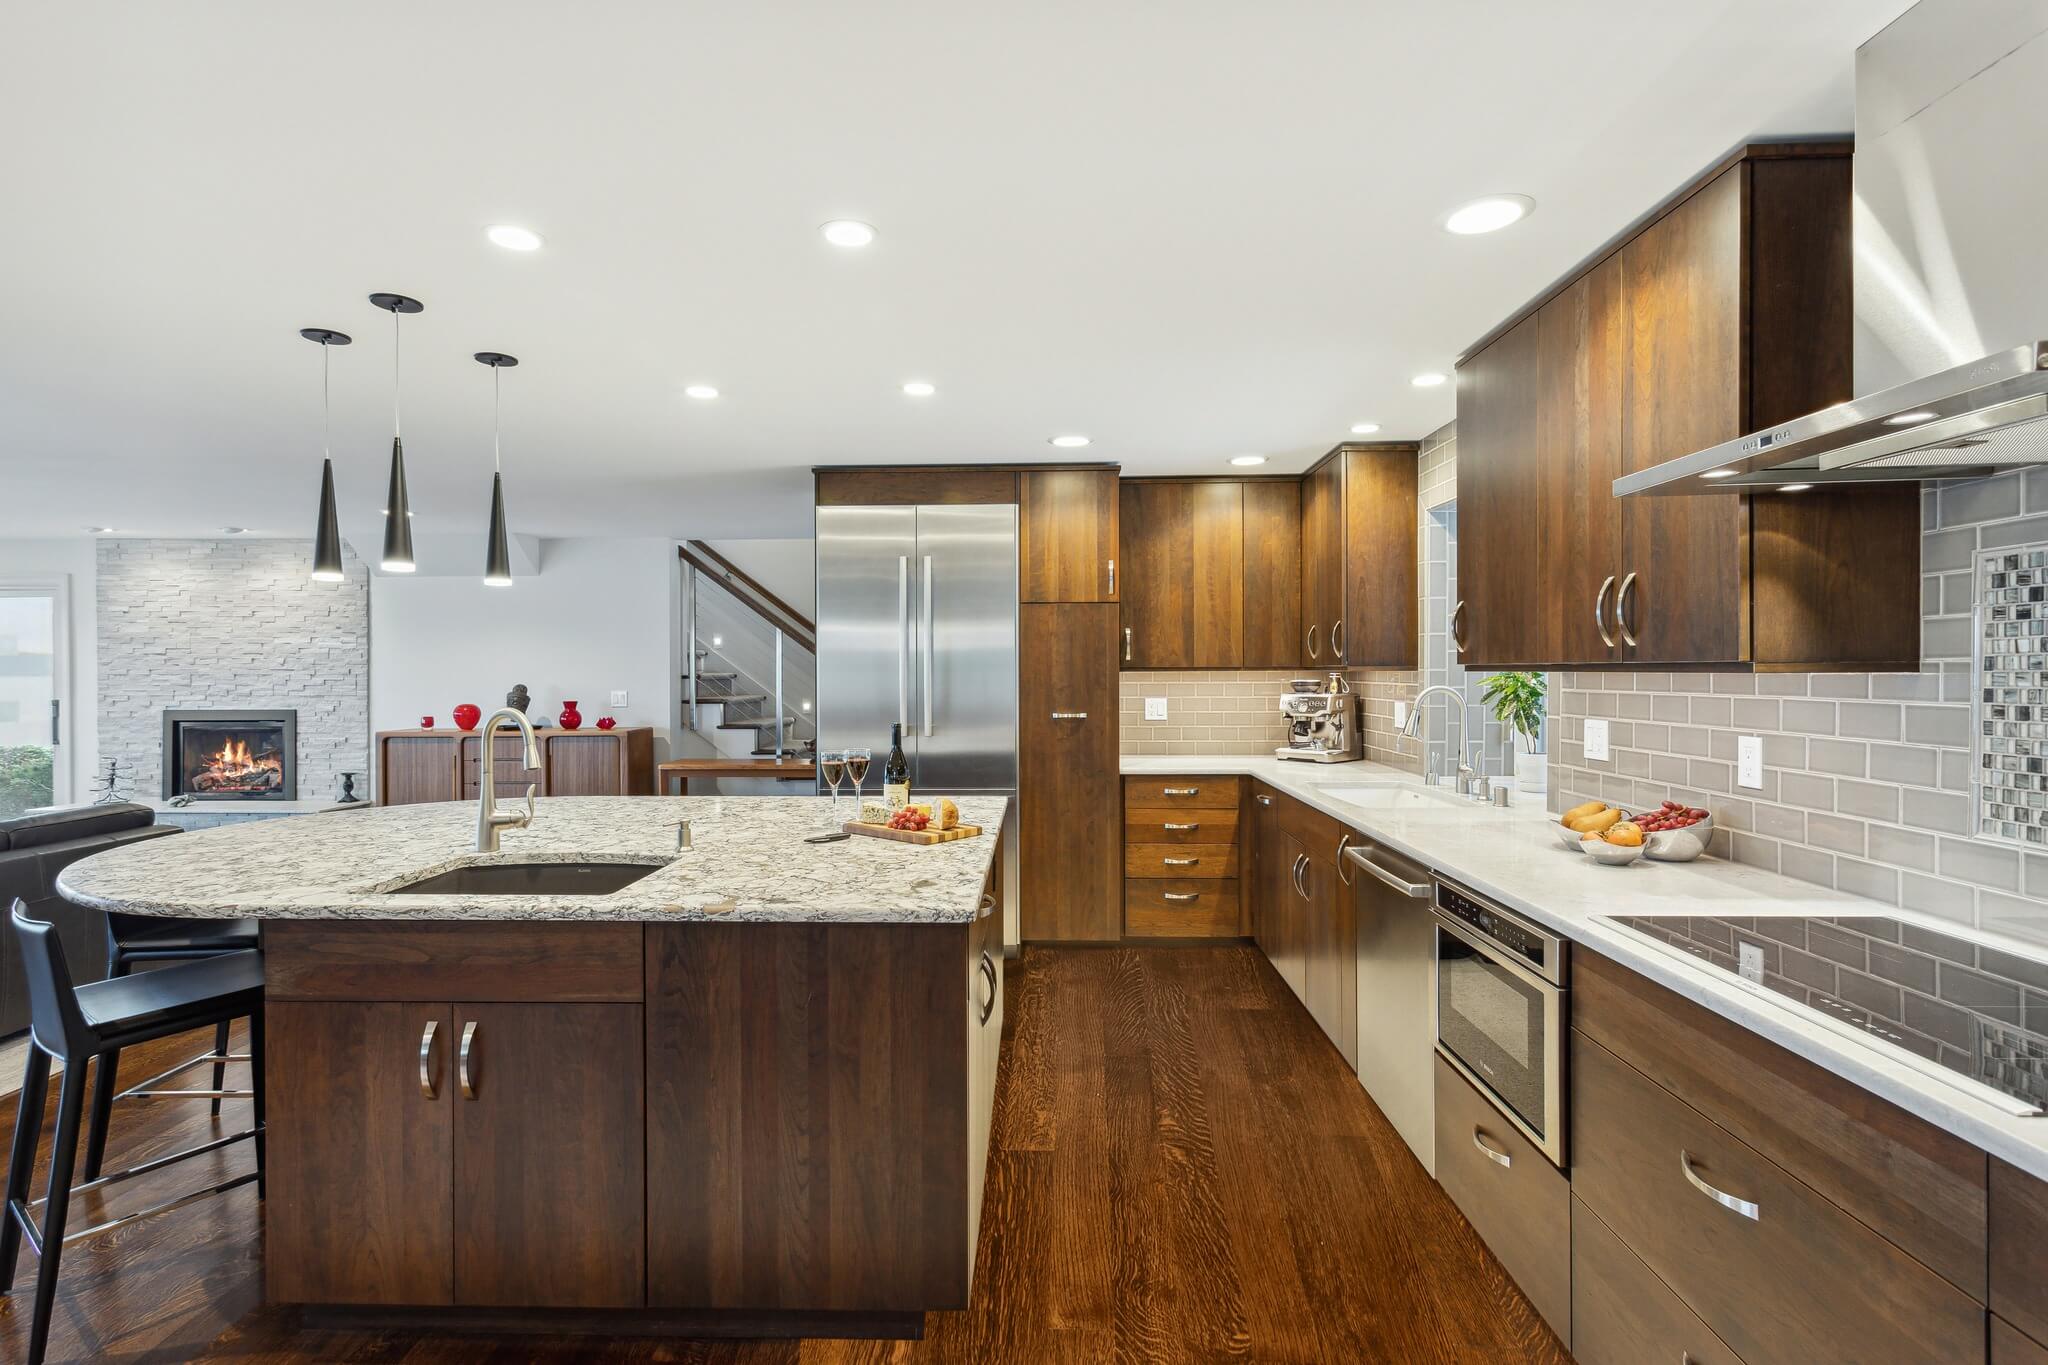 A modern kitchen design with warm stained cabinets with a slab door style.